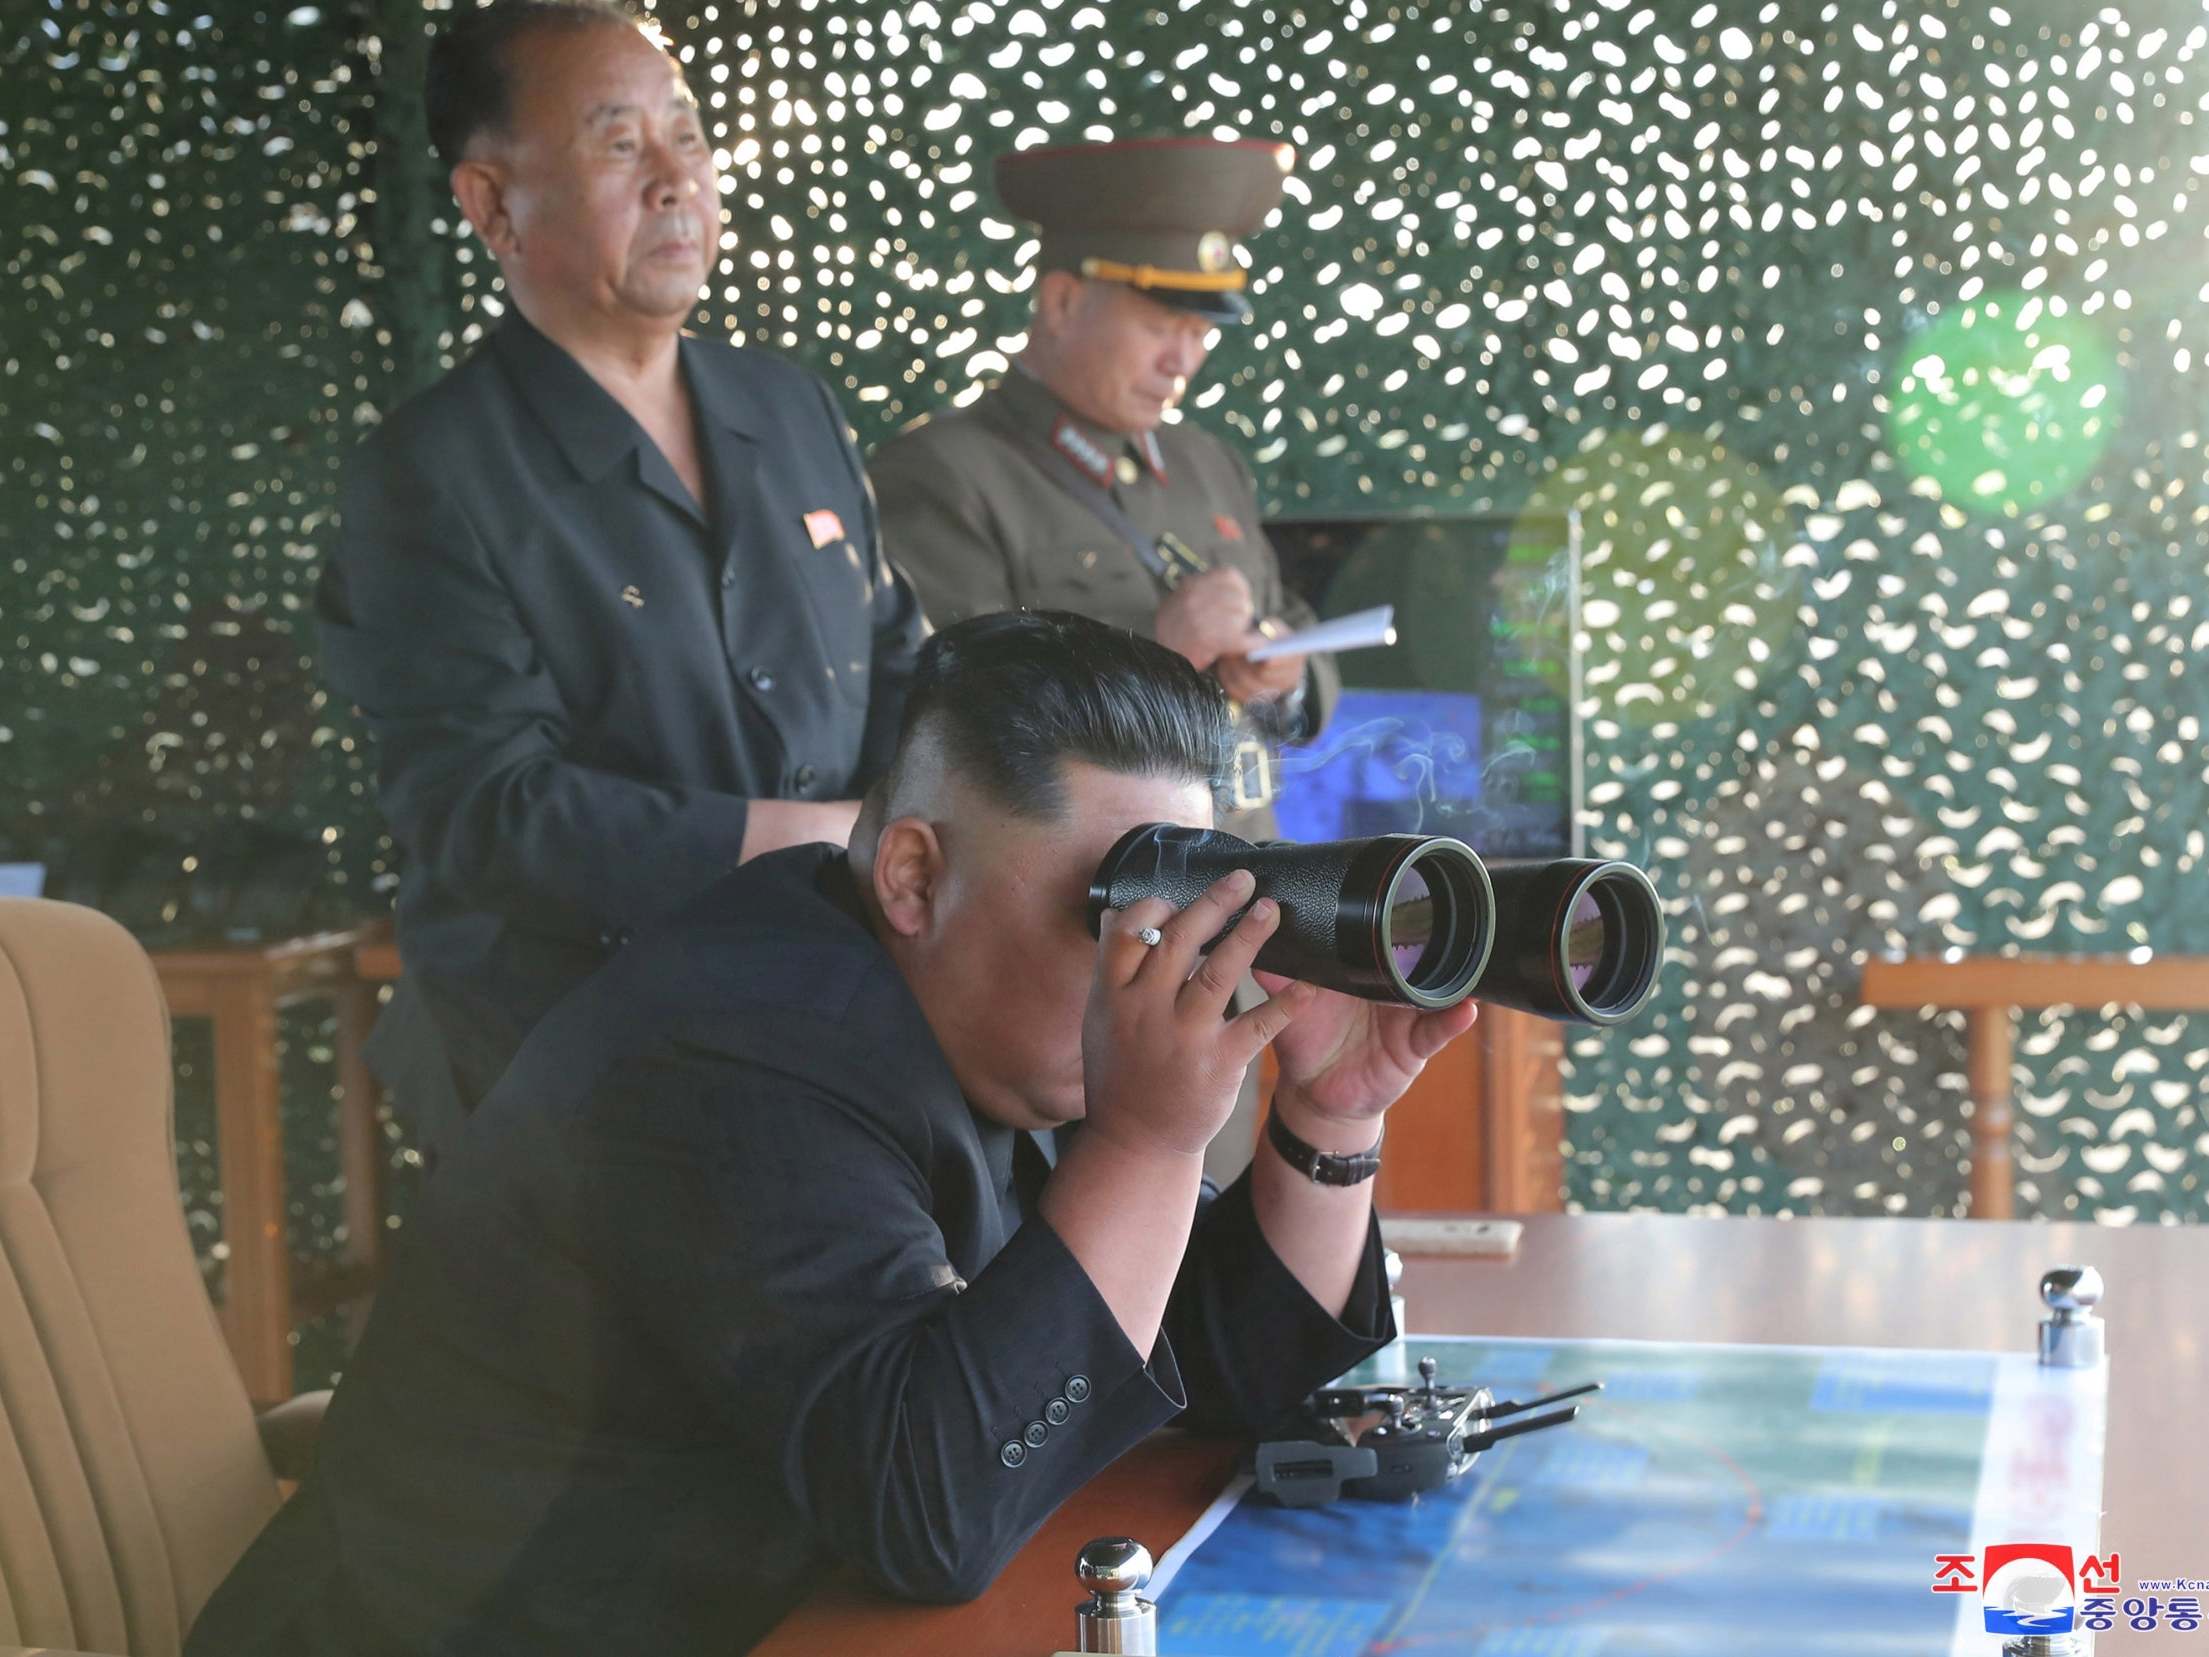 Kim Jong Un pictured watching the test of a multiple rocket launcher, according to state media